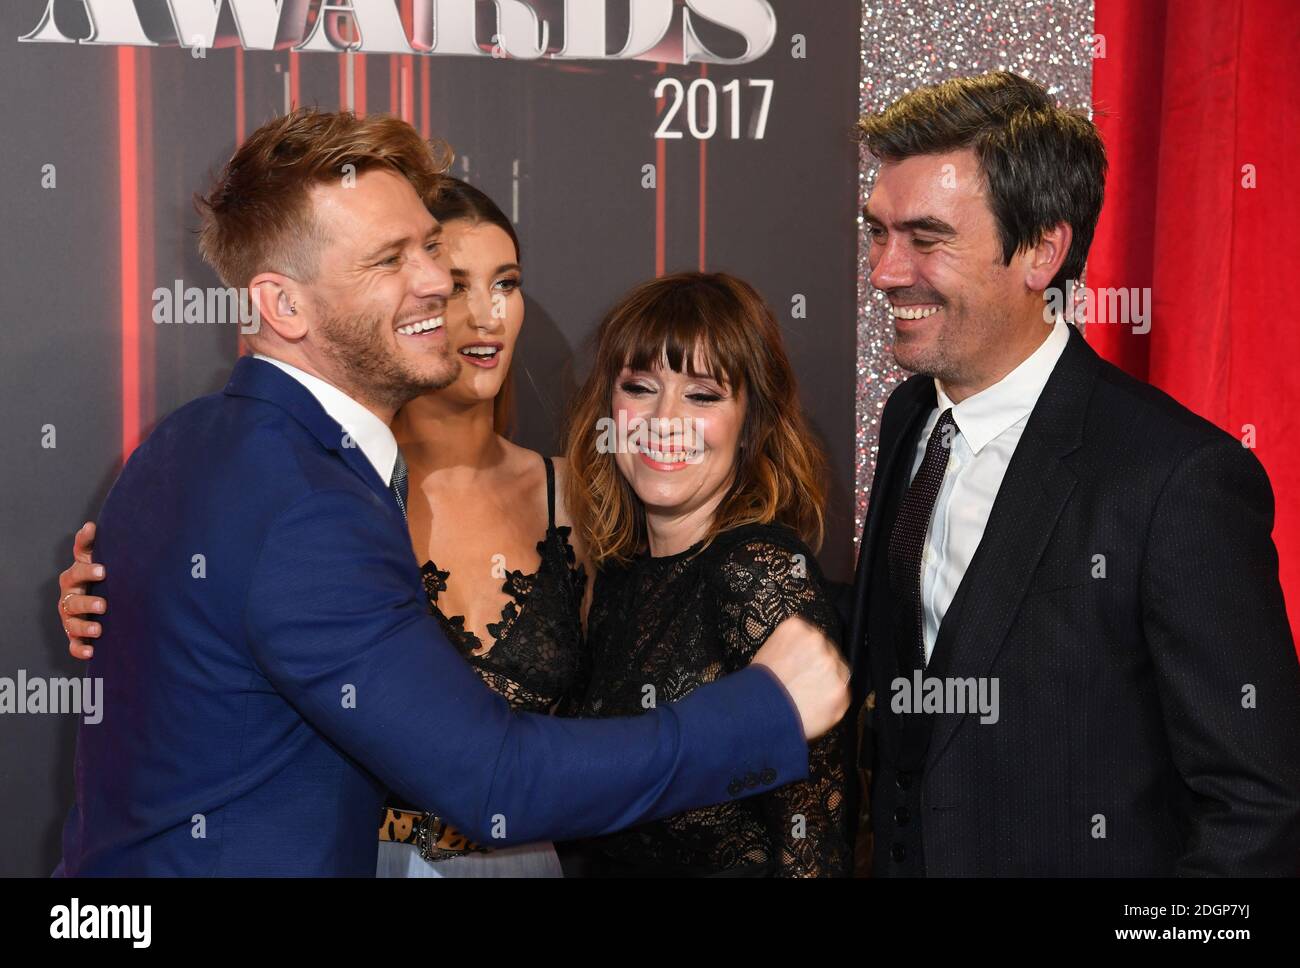 Matthew Wolfenden, Charley Webb, Zoe Henry and Jeff Hordley attending the British Soap Awards 2017, held at the Lowry Theatre, in Salford, Manchester. Photo Copyright should read Doug Peters/EMPICS Entertainment Stock Photo